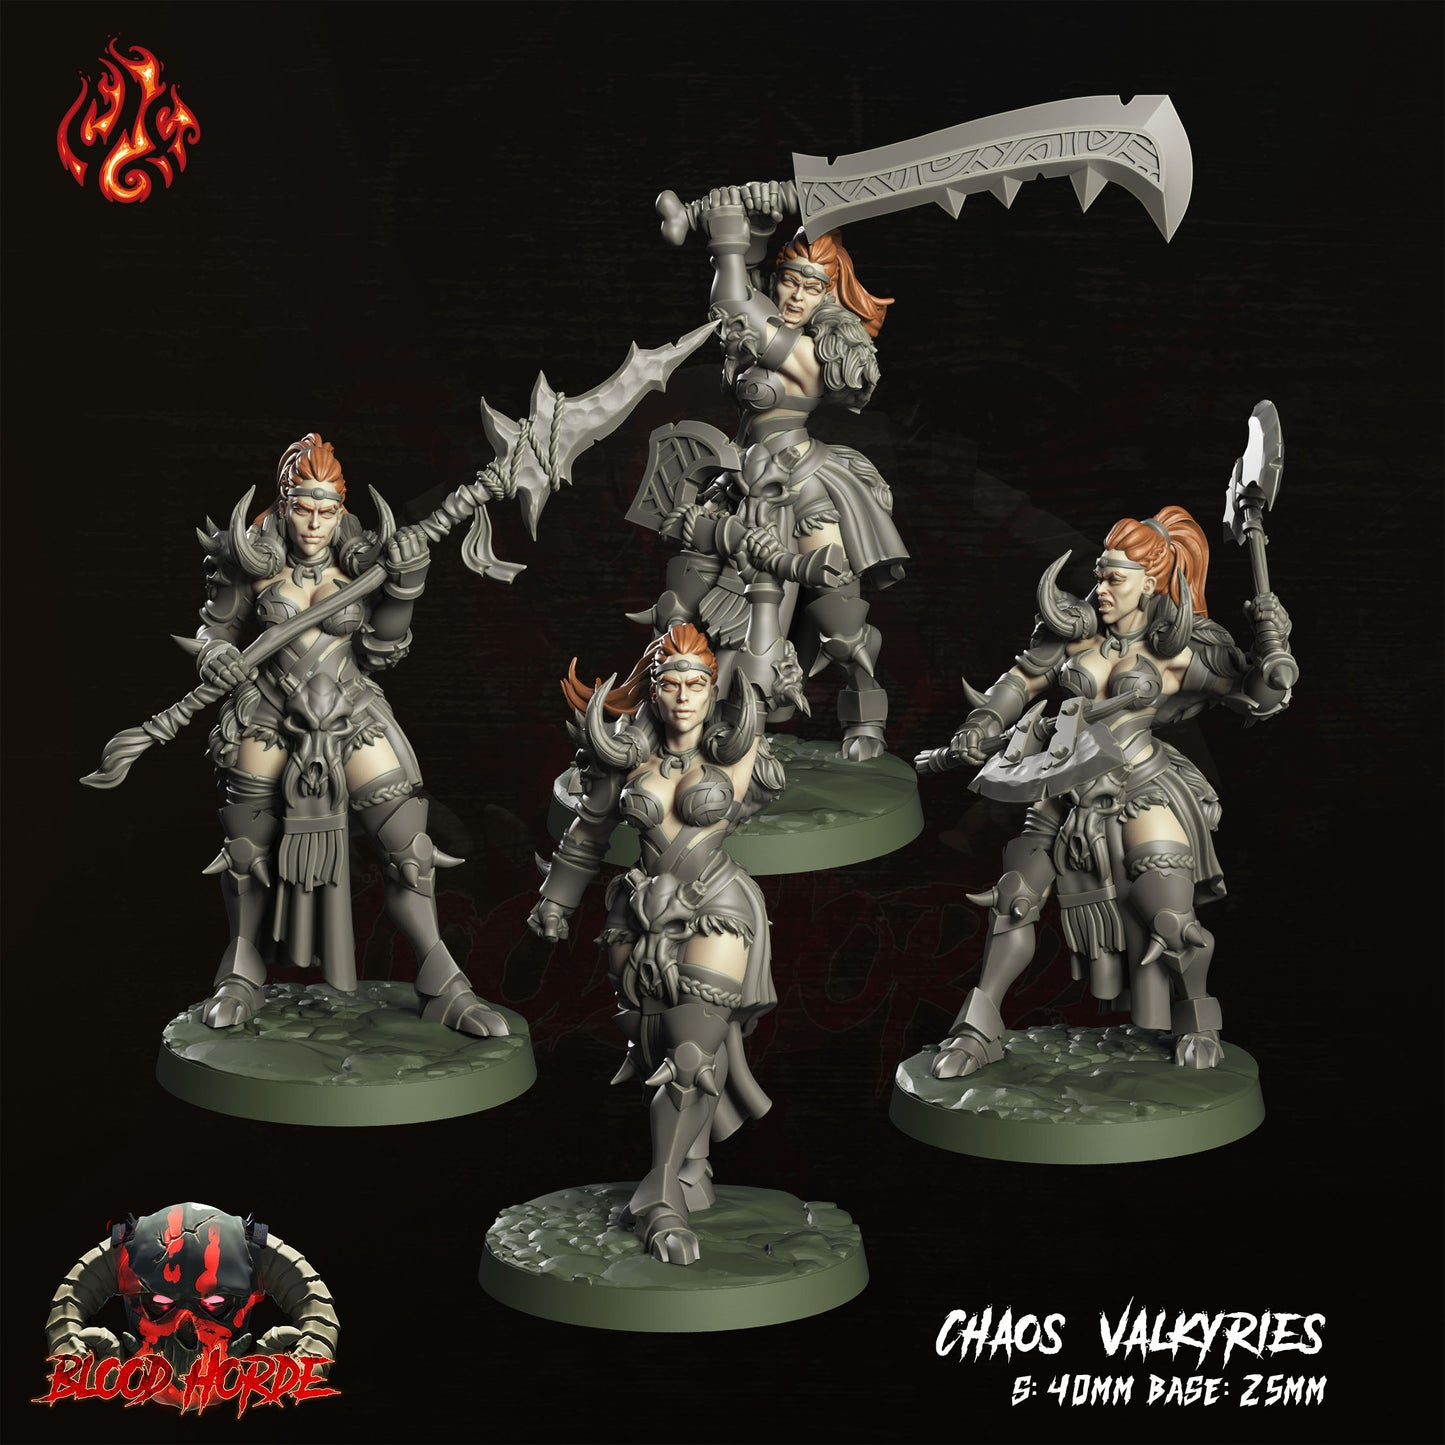 Chaos Valkyries (4 variants) - The Bloode Horde - from Crippled God Foundry - Table-top gaming mini and collectable for painting.